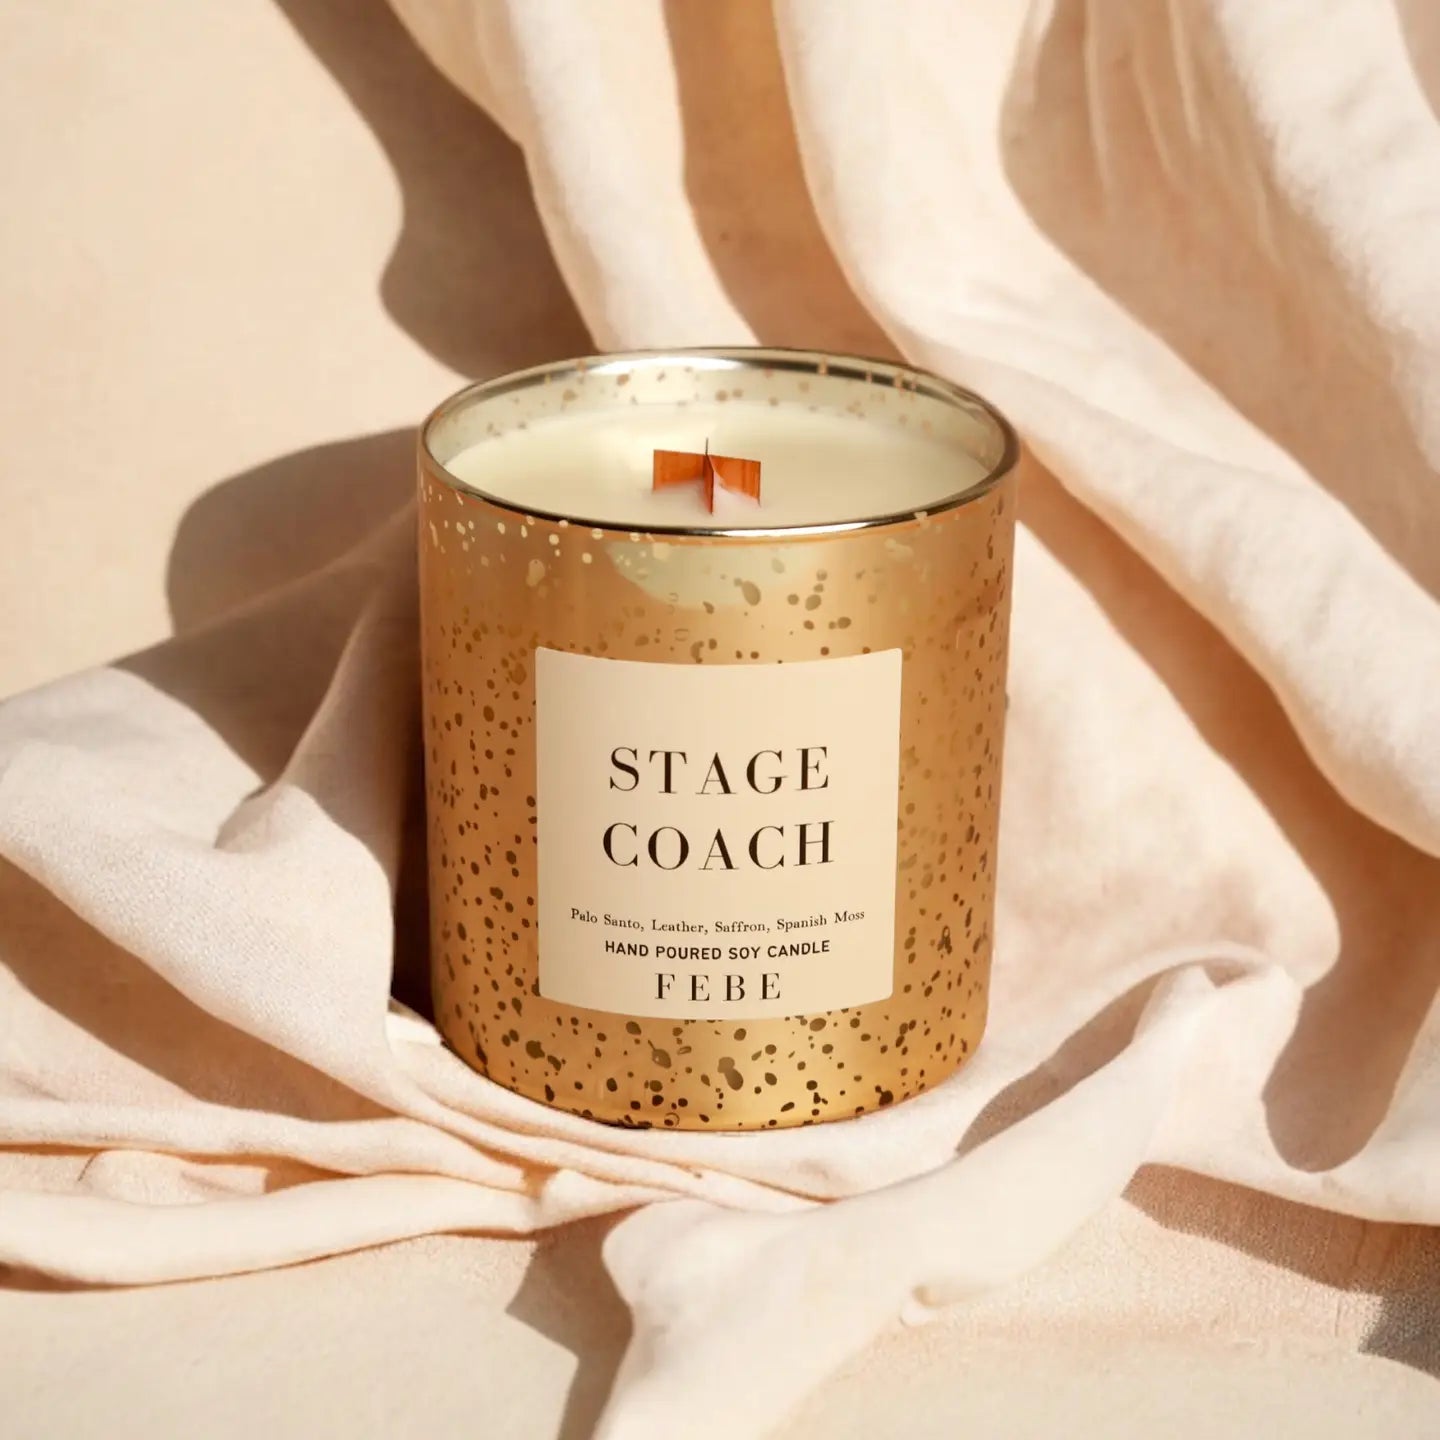 A scented candle labeled "FEBE candle by Faire" in a speckled gold container with a wooden wick, set against a soft beige Bungalow-style fabric background.